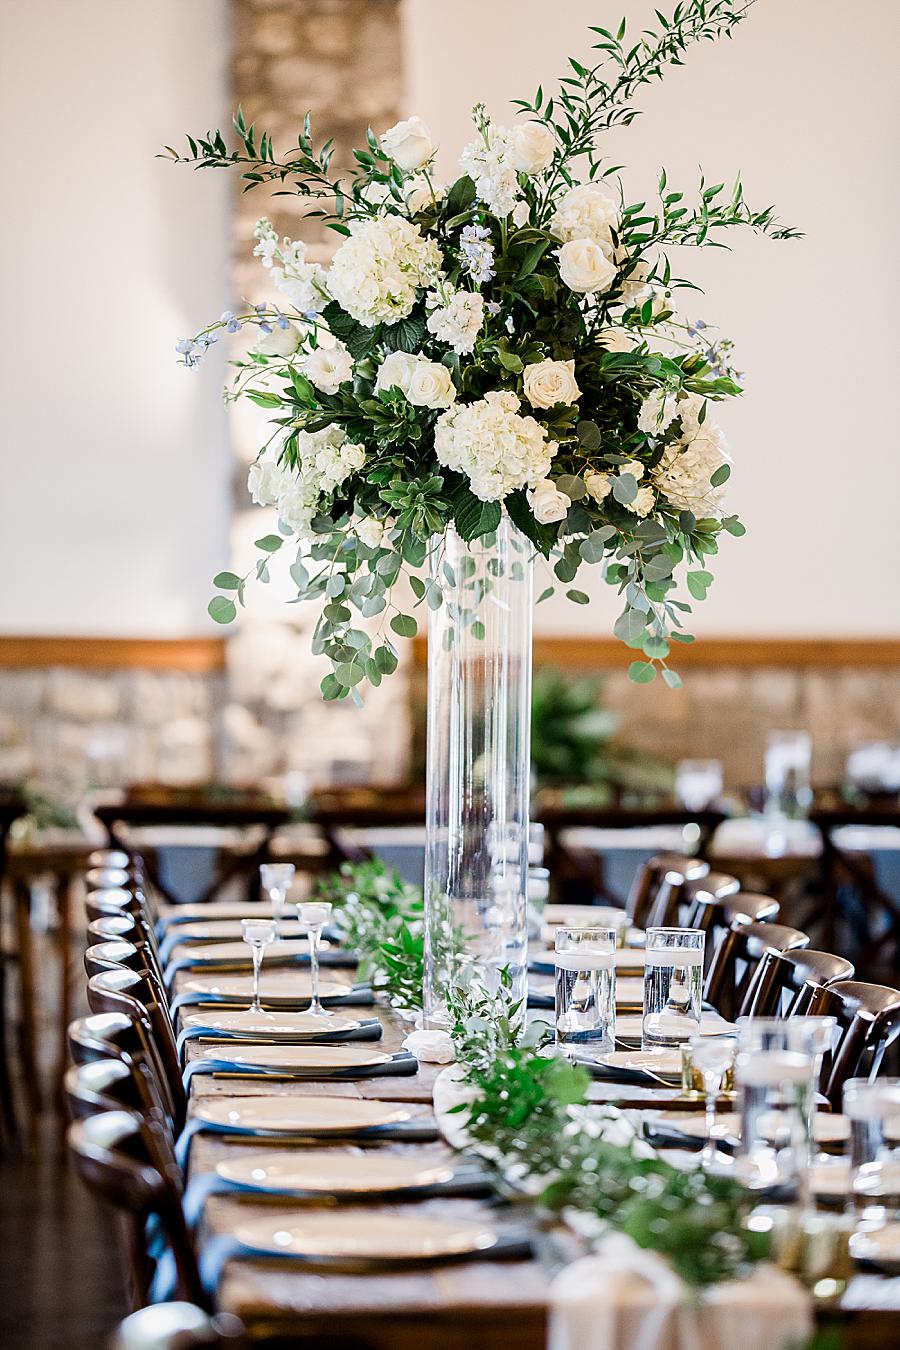 Centerpiece at this Graystone Quarry wedding by Knoxville Wedding Photographer, Amanda May Photos.